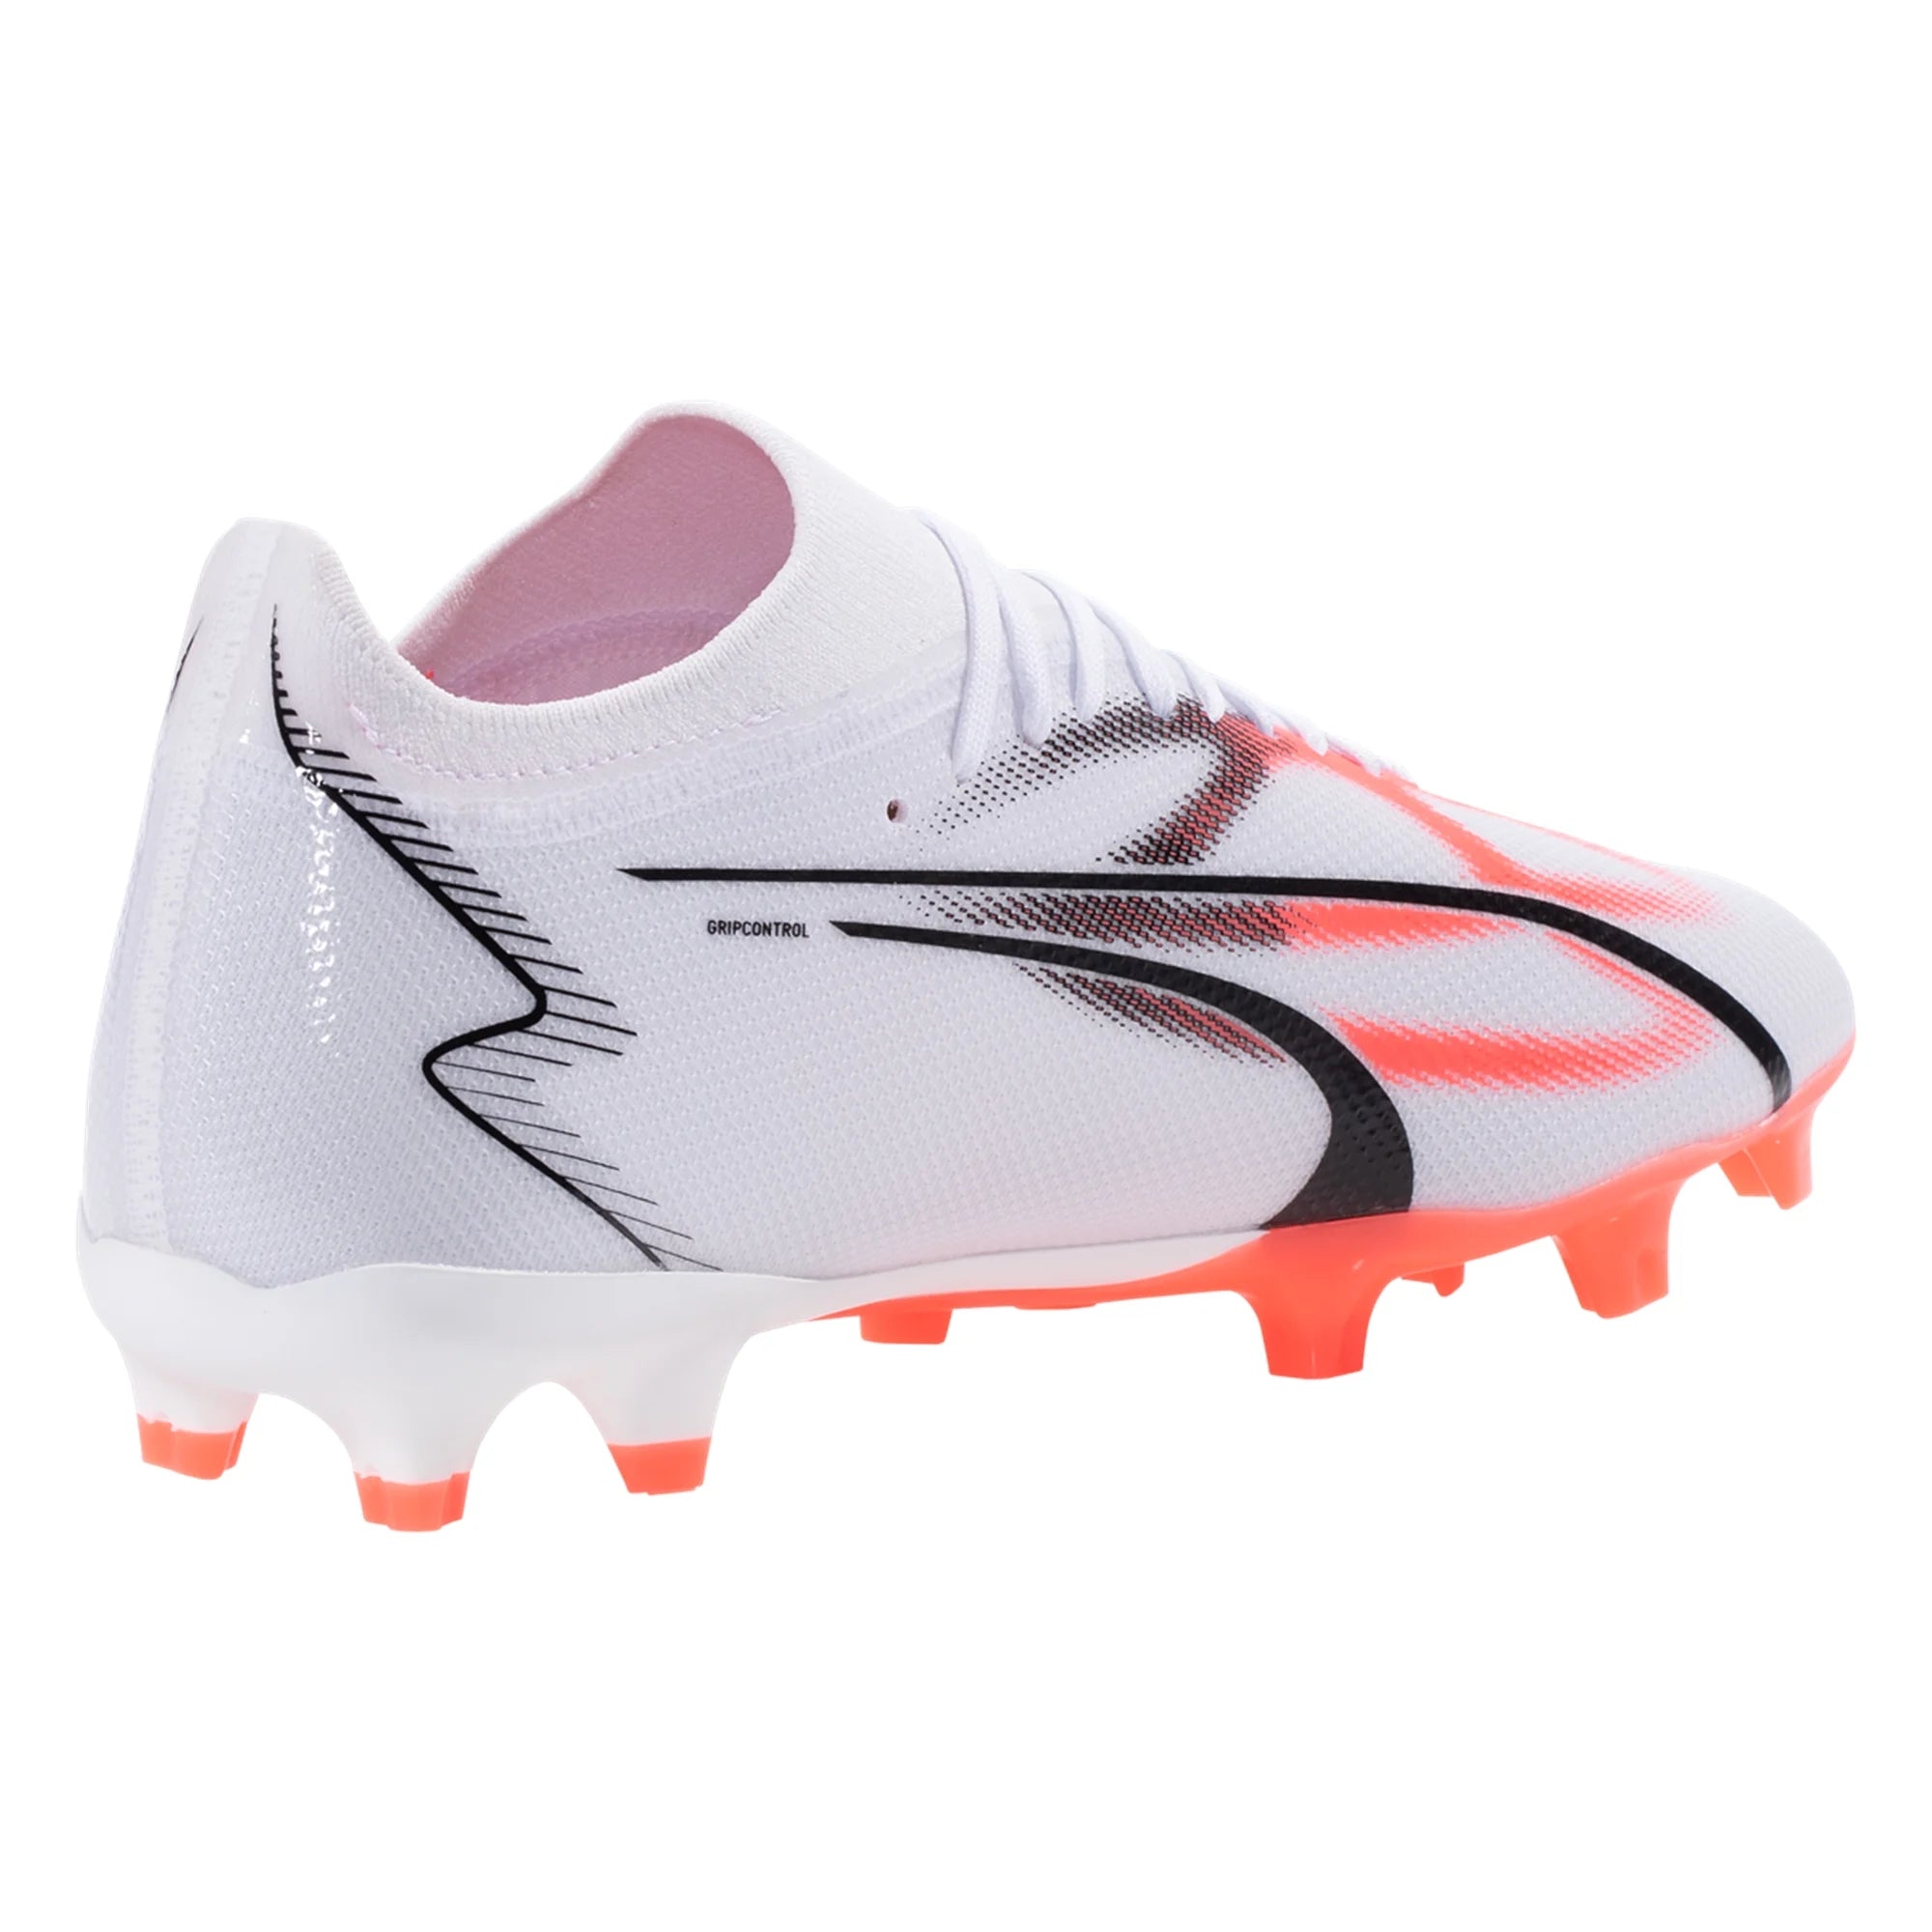 Ground Cleat FG/AG – USA 107347-01 Firm Soccer Soccer White/Black/Fire - Ultra Match Orchid Zone Puma